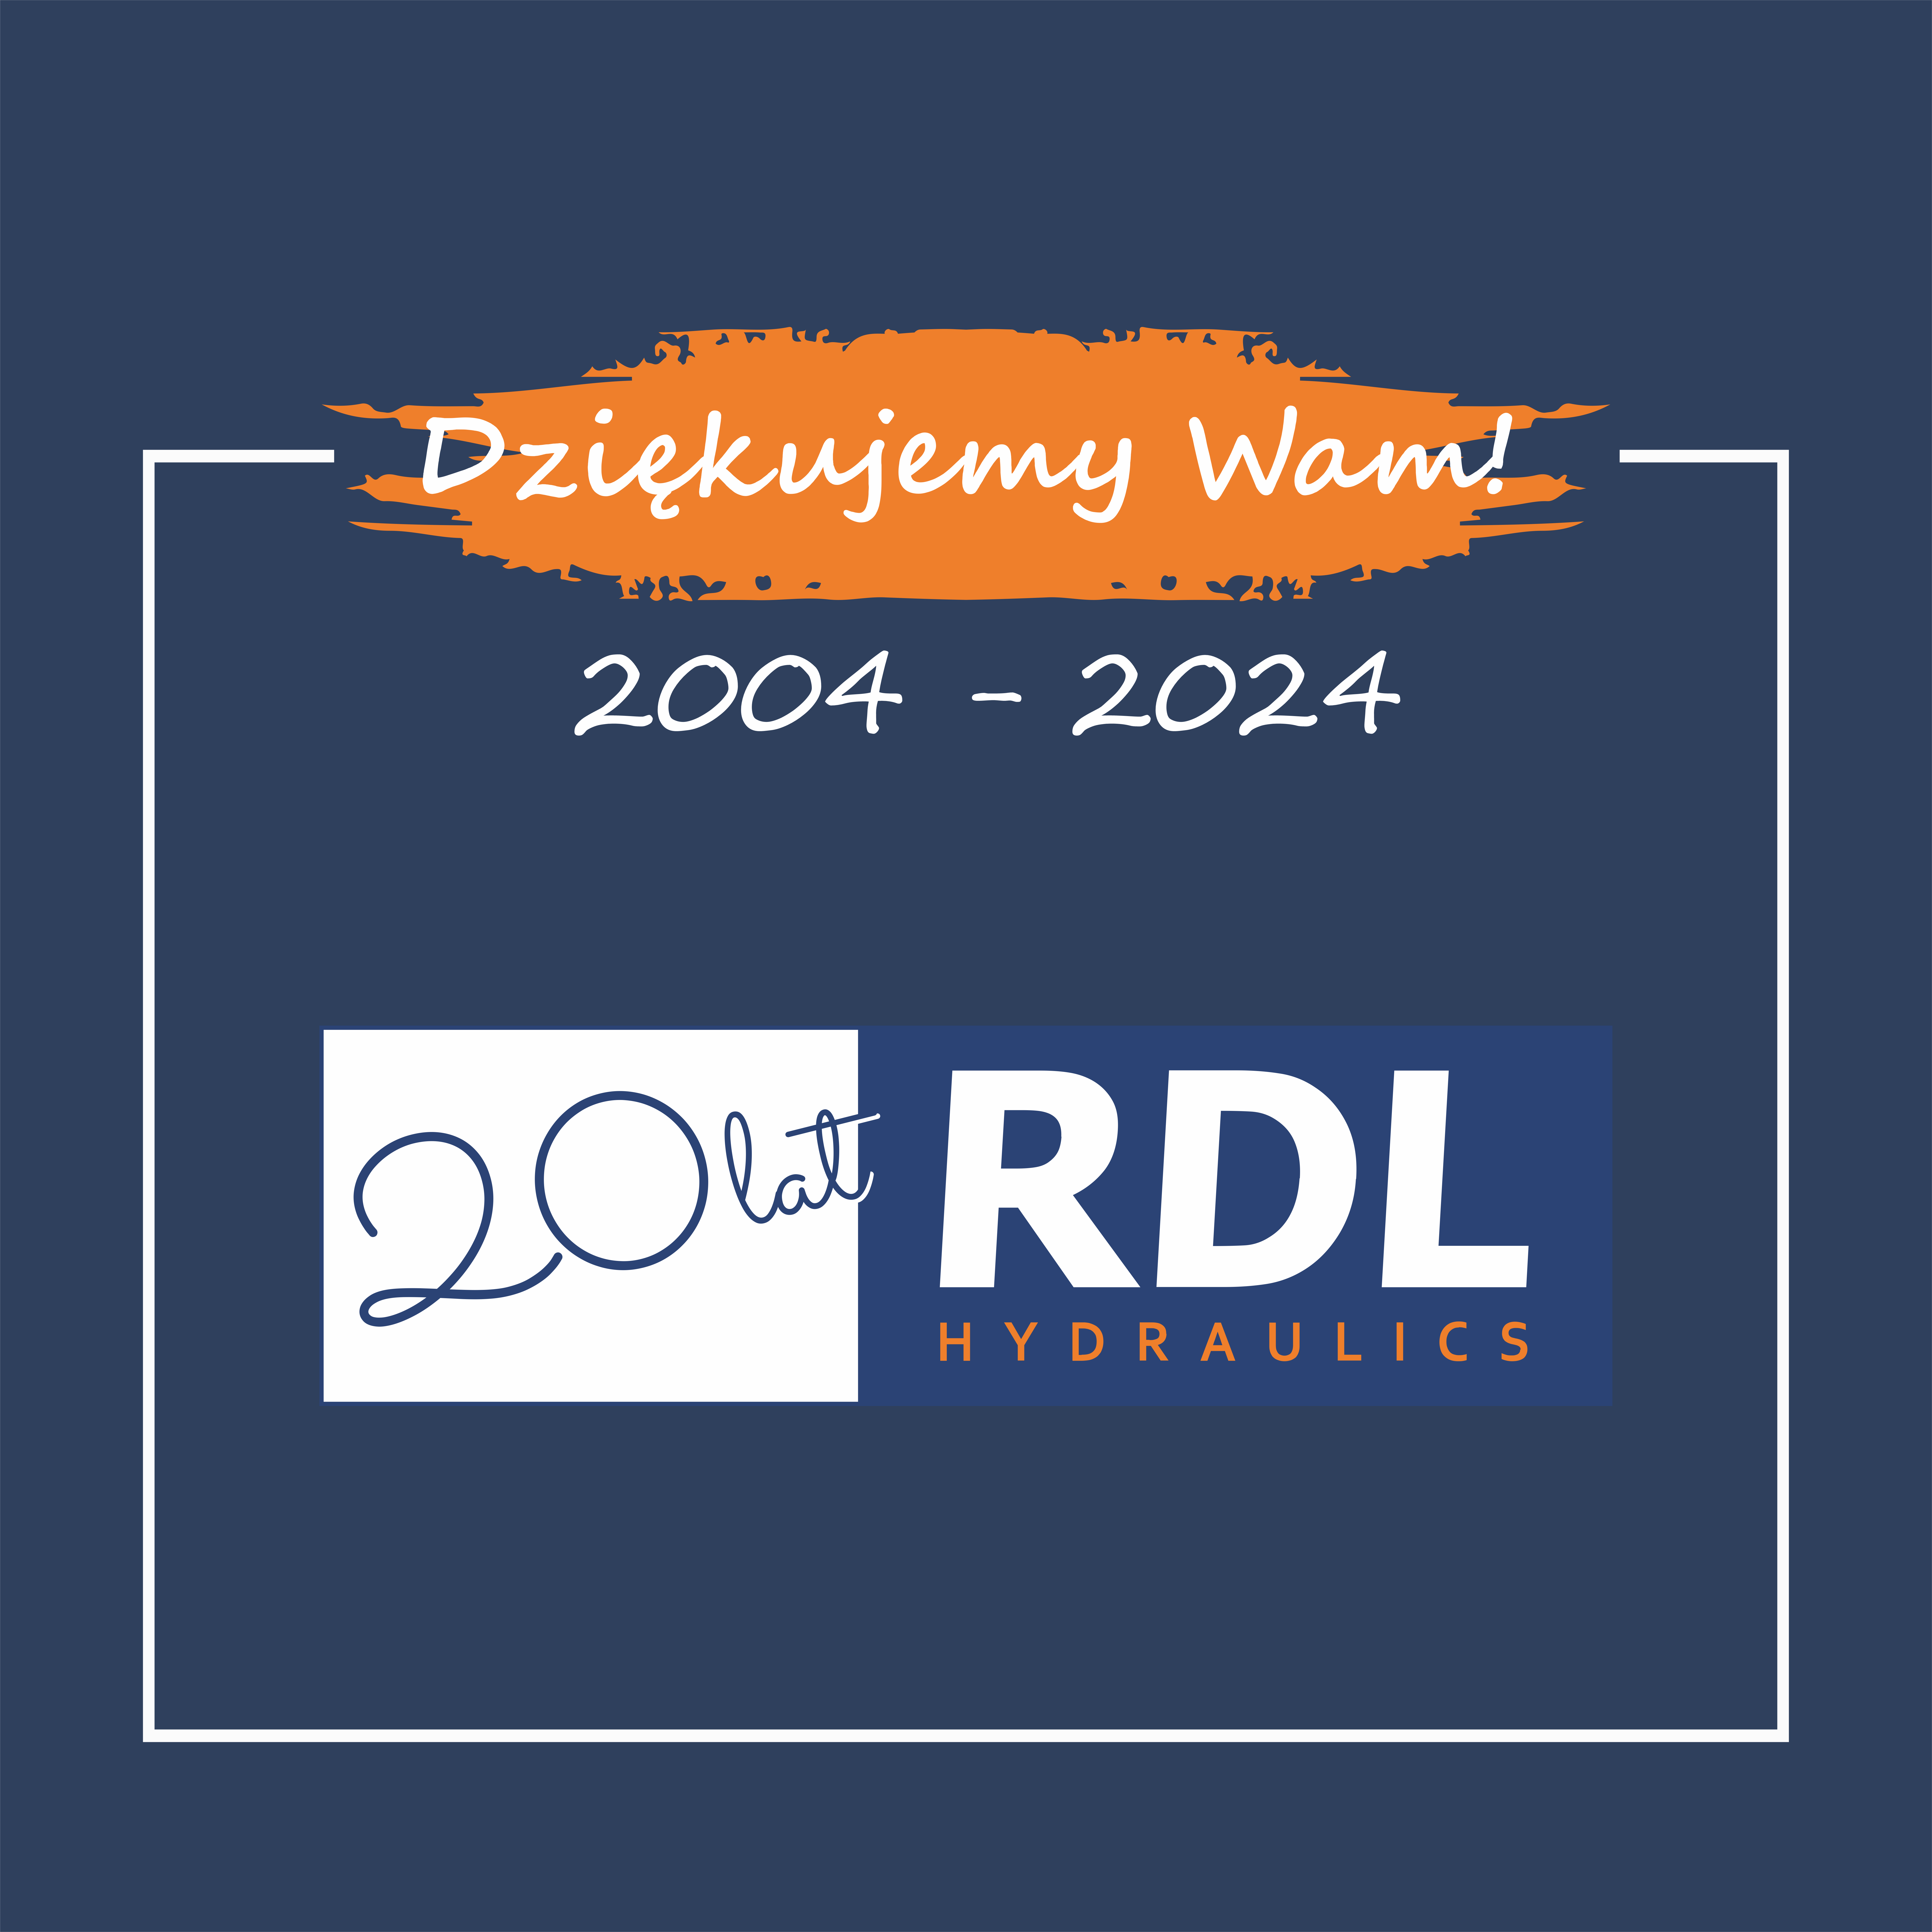 rdl rocznica linked3 hydraulics 9bf039d4 0513 112229 - 20th anniversary